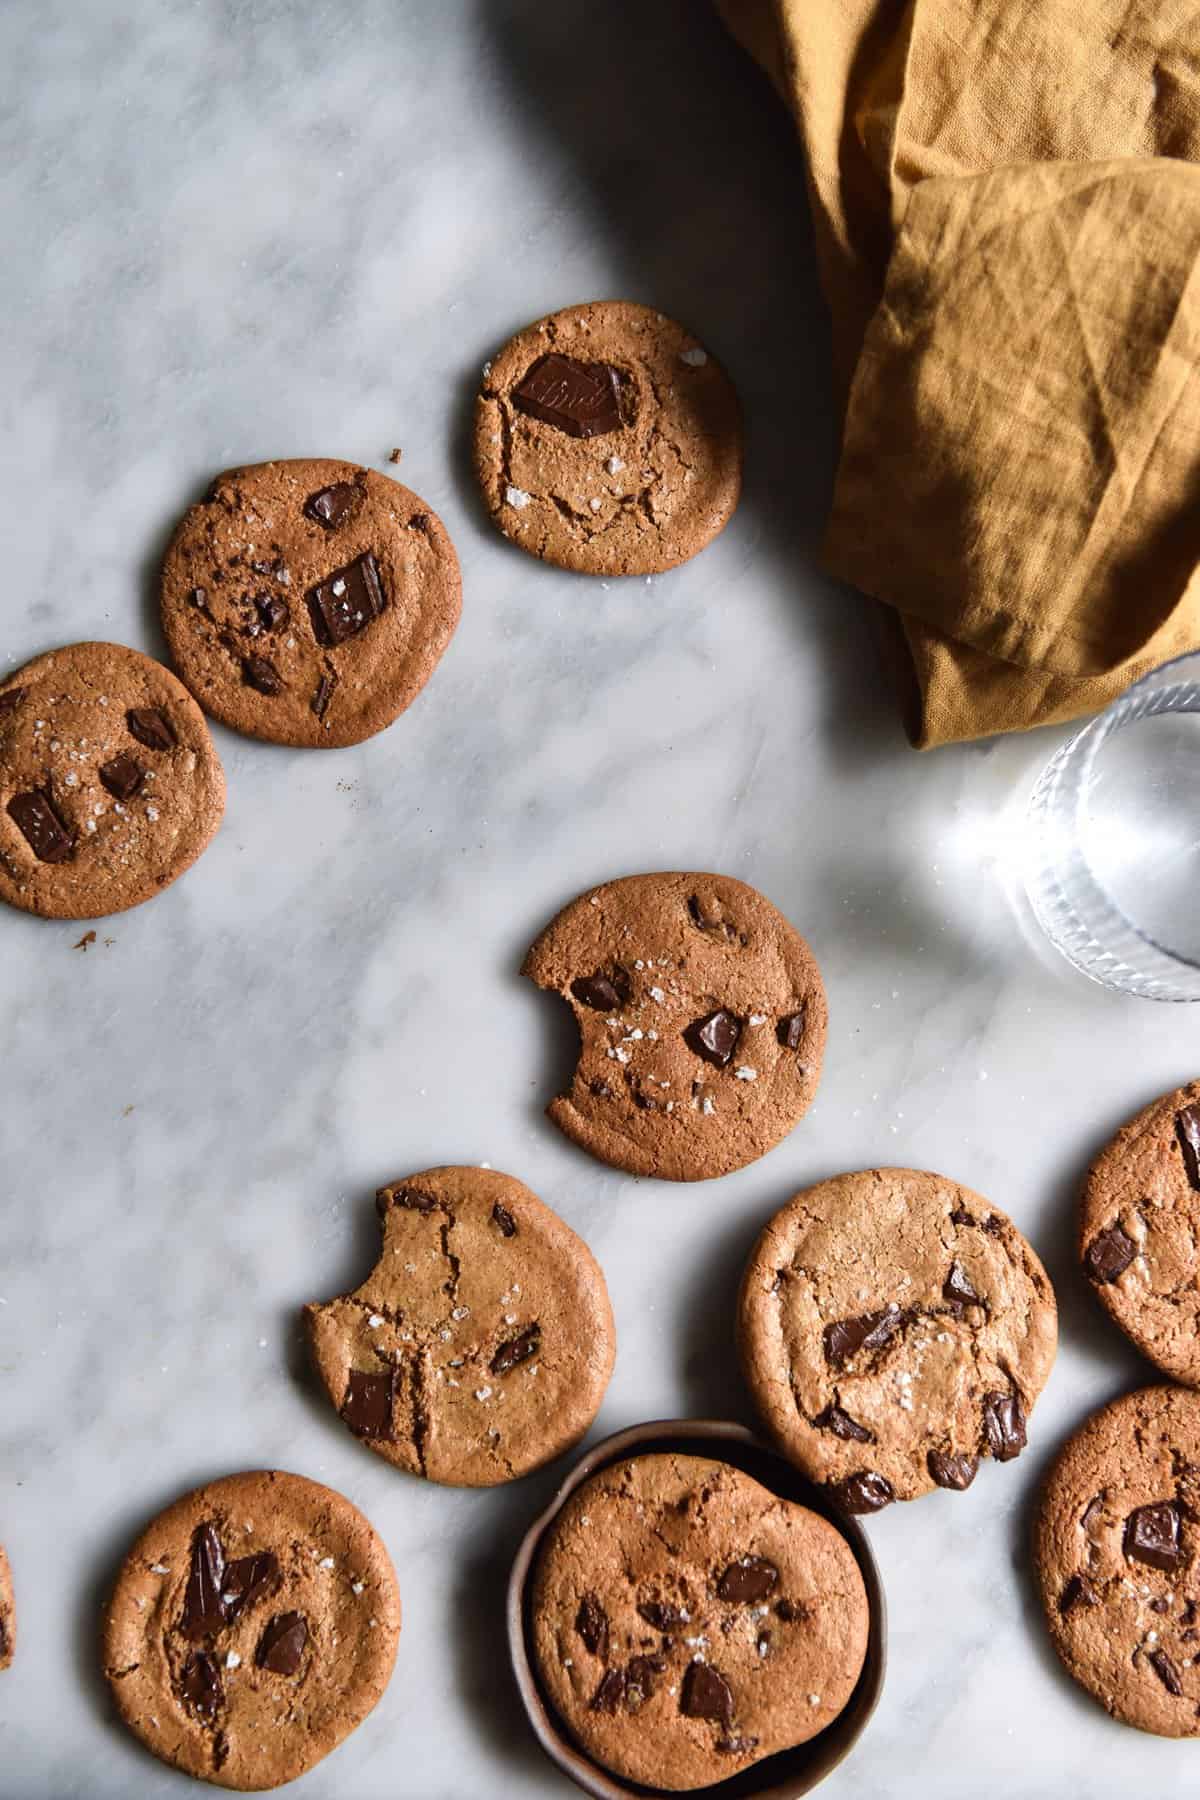 An aerial image of almond butter choc chip cookies casually arranged on a white marble table.